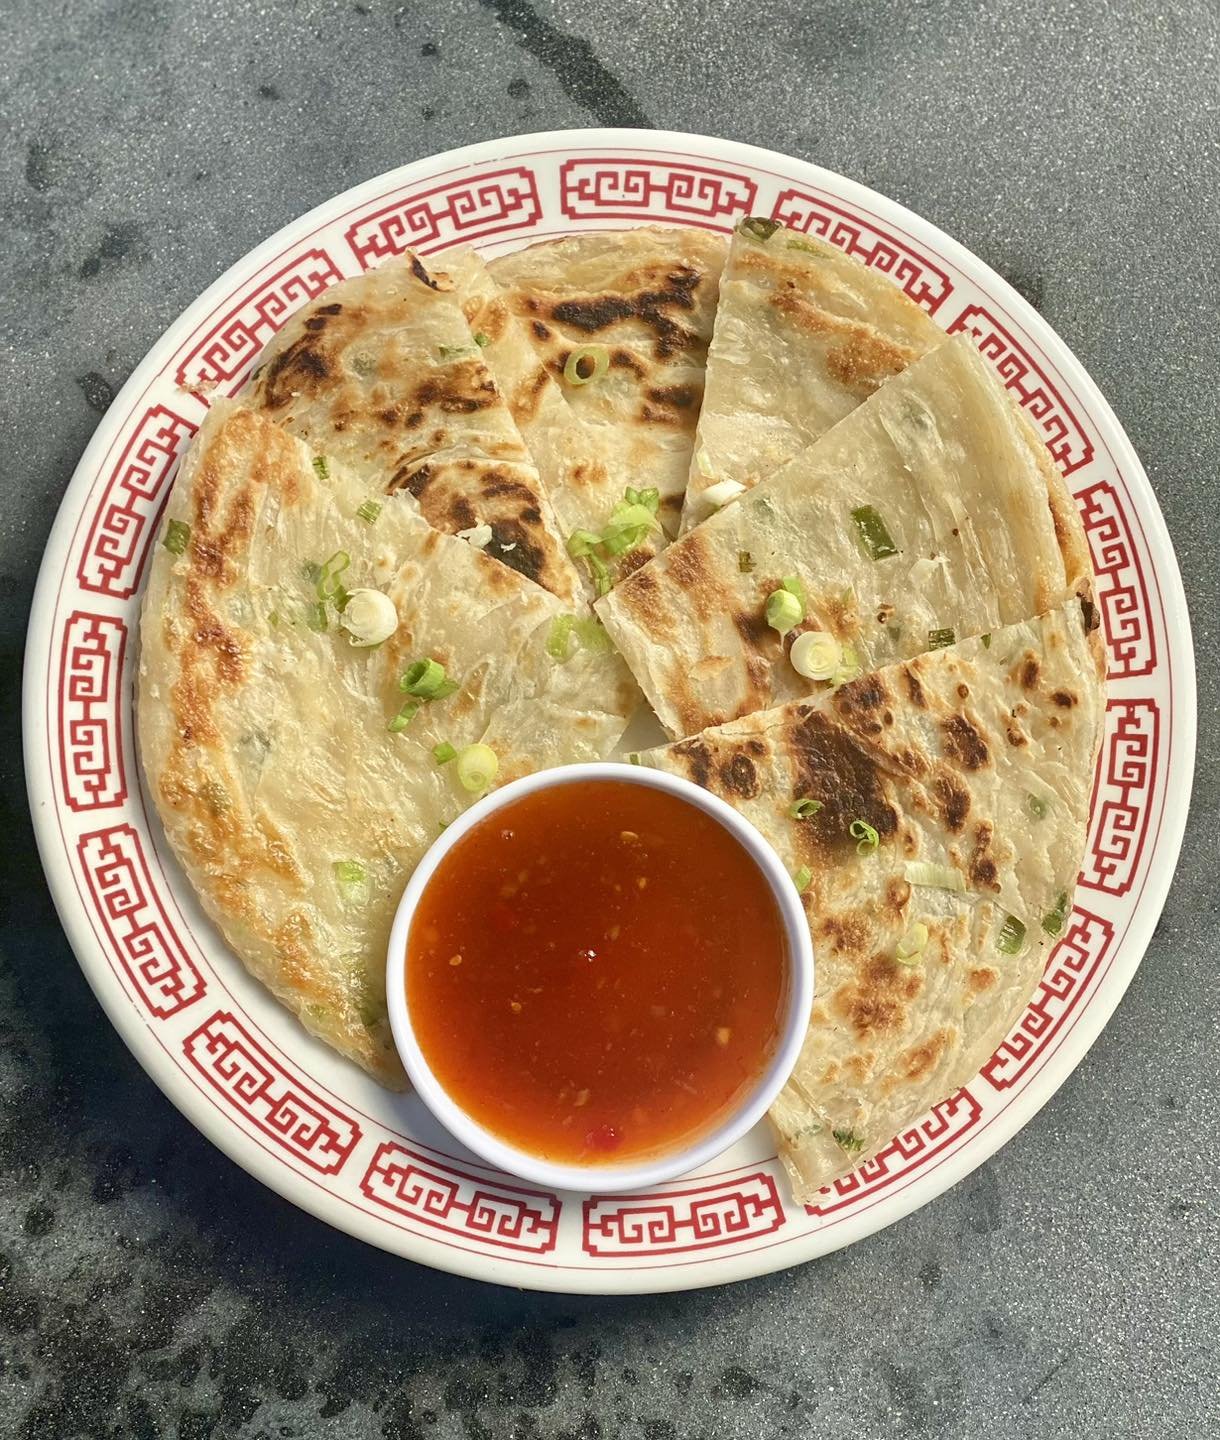 Introducing a May feature, Scallion Pancakes!

Savory, unleavened flatbread folded with oil and minced scallion. Served w/ chili plum sauce 😋🤌